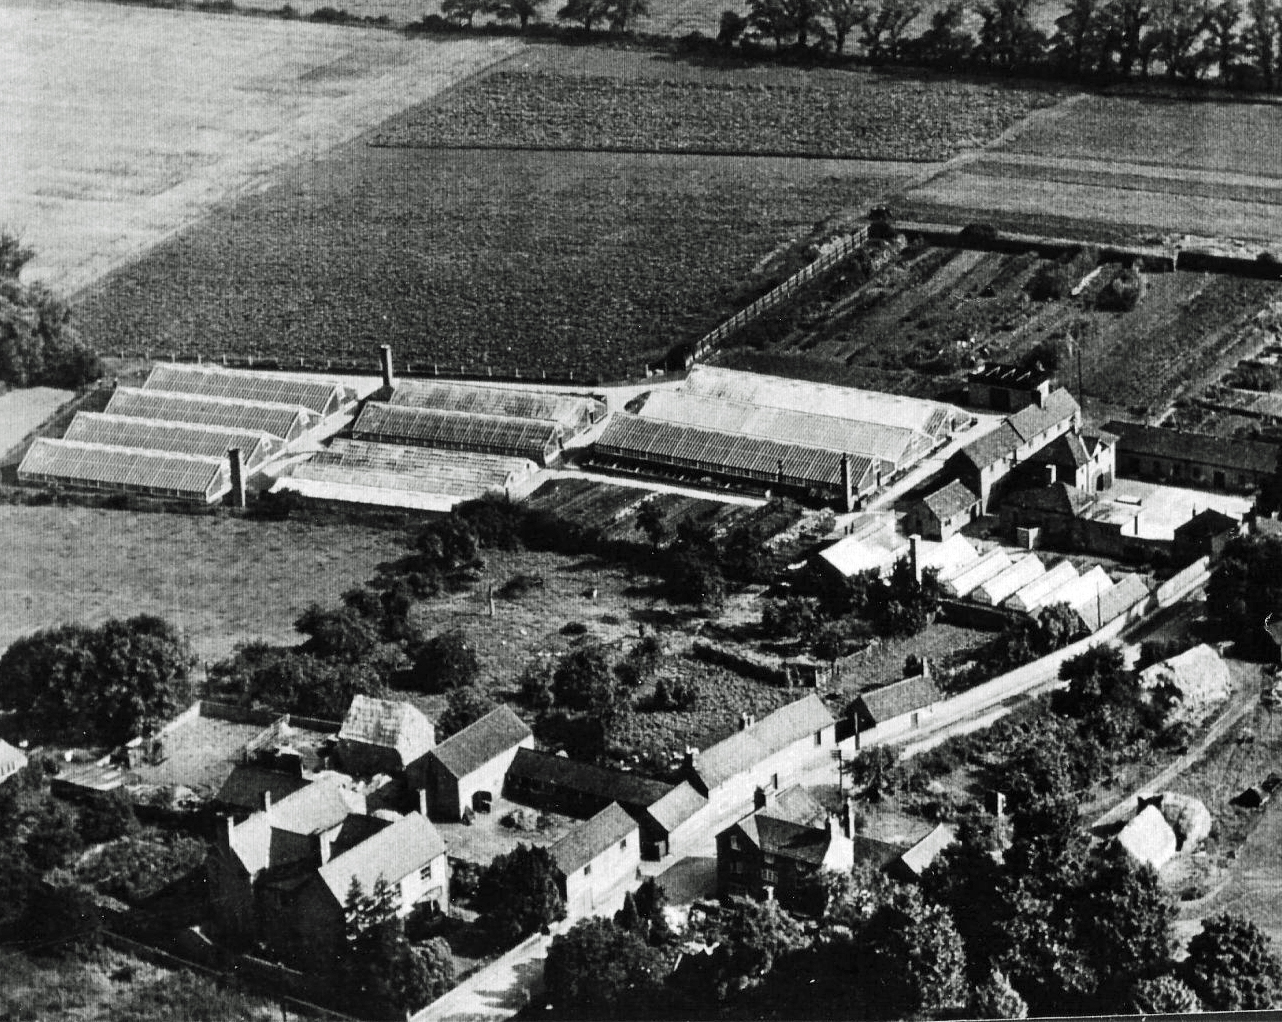 Leicester Corporation Plant nursery, later as Leicester change to a city Leicester City Nursery Rotherby